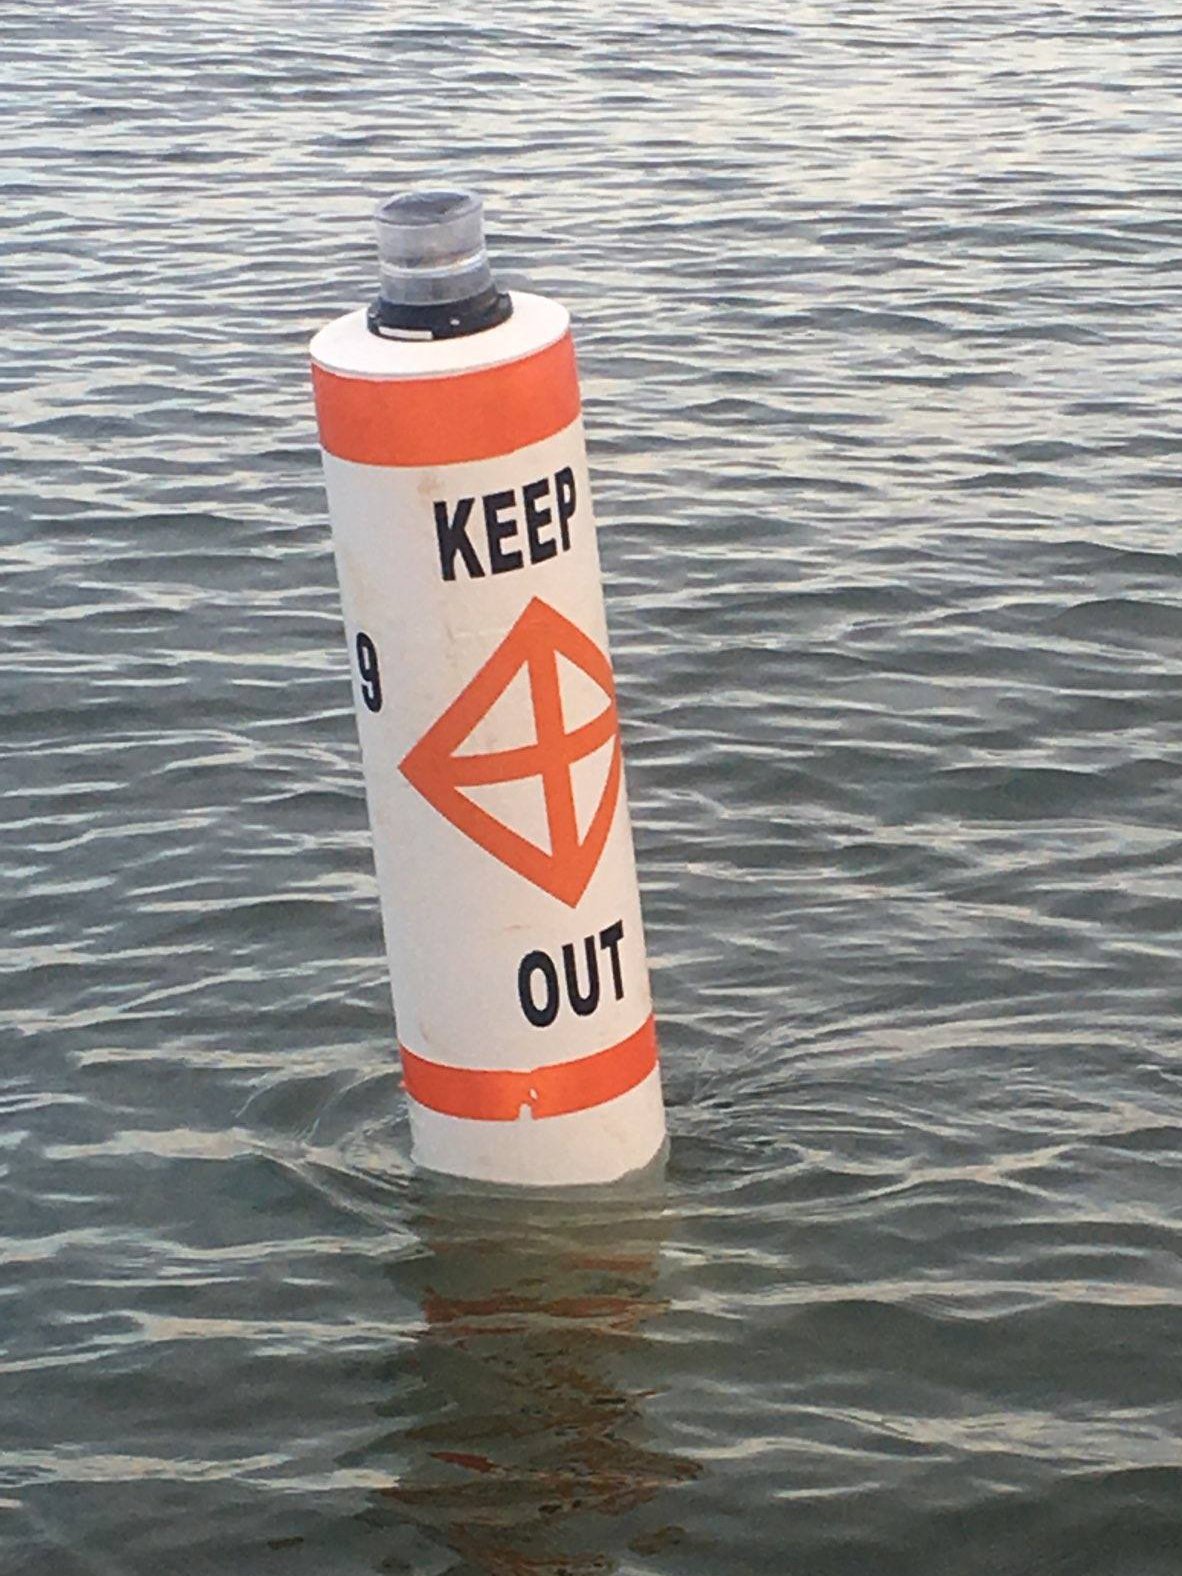 You See a White Buoy with an Orange Square and Black Lettering: Decoding Navigational Markers